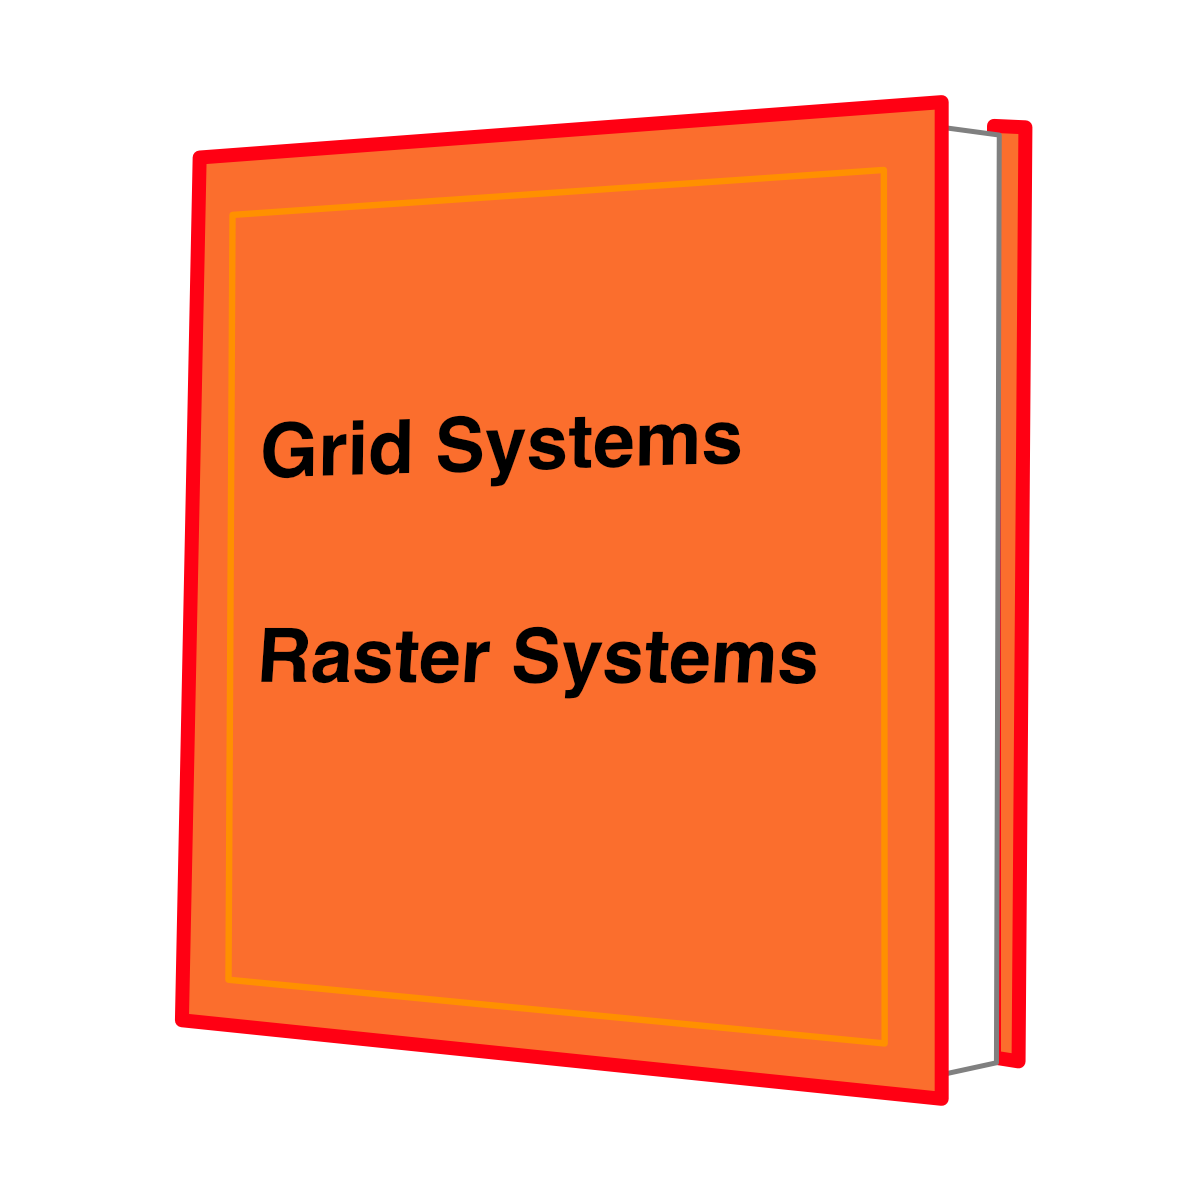 The grid systems book cover